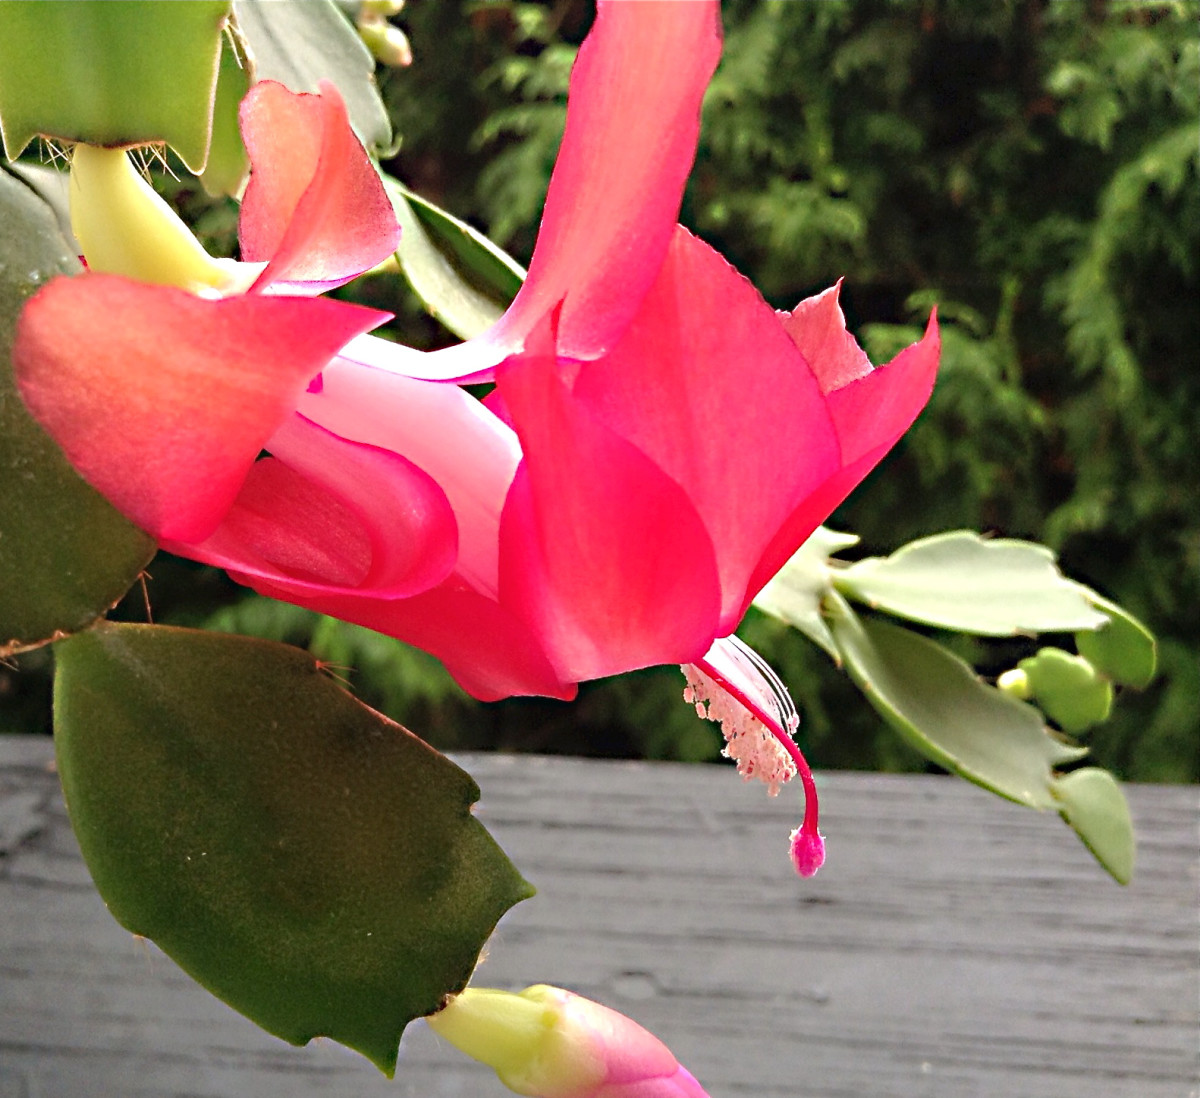 This is one of my Christmas cactus flowers. The plant lives indoors, but I took it outside to photograph it.